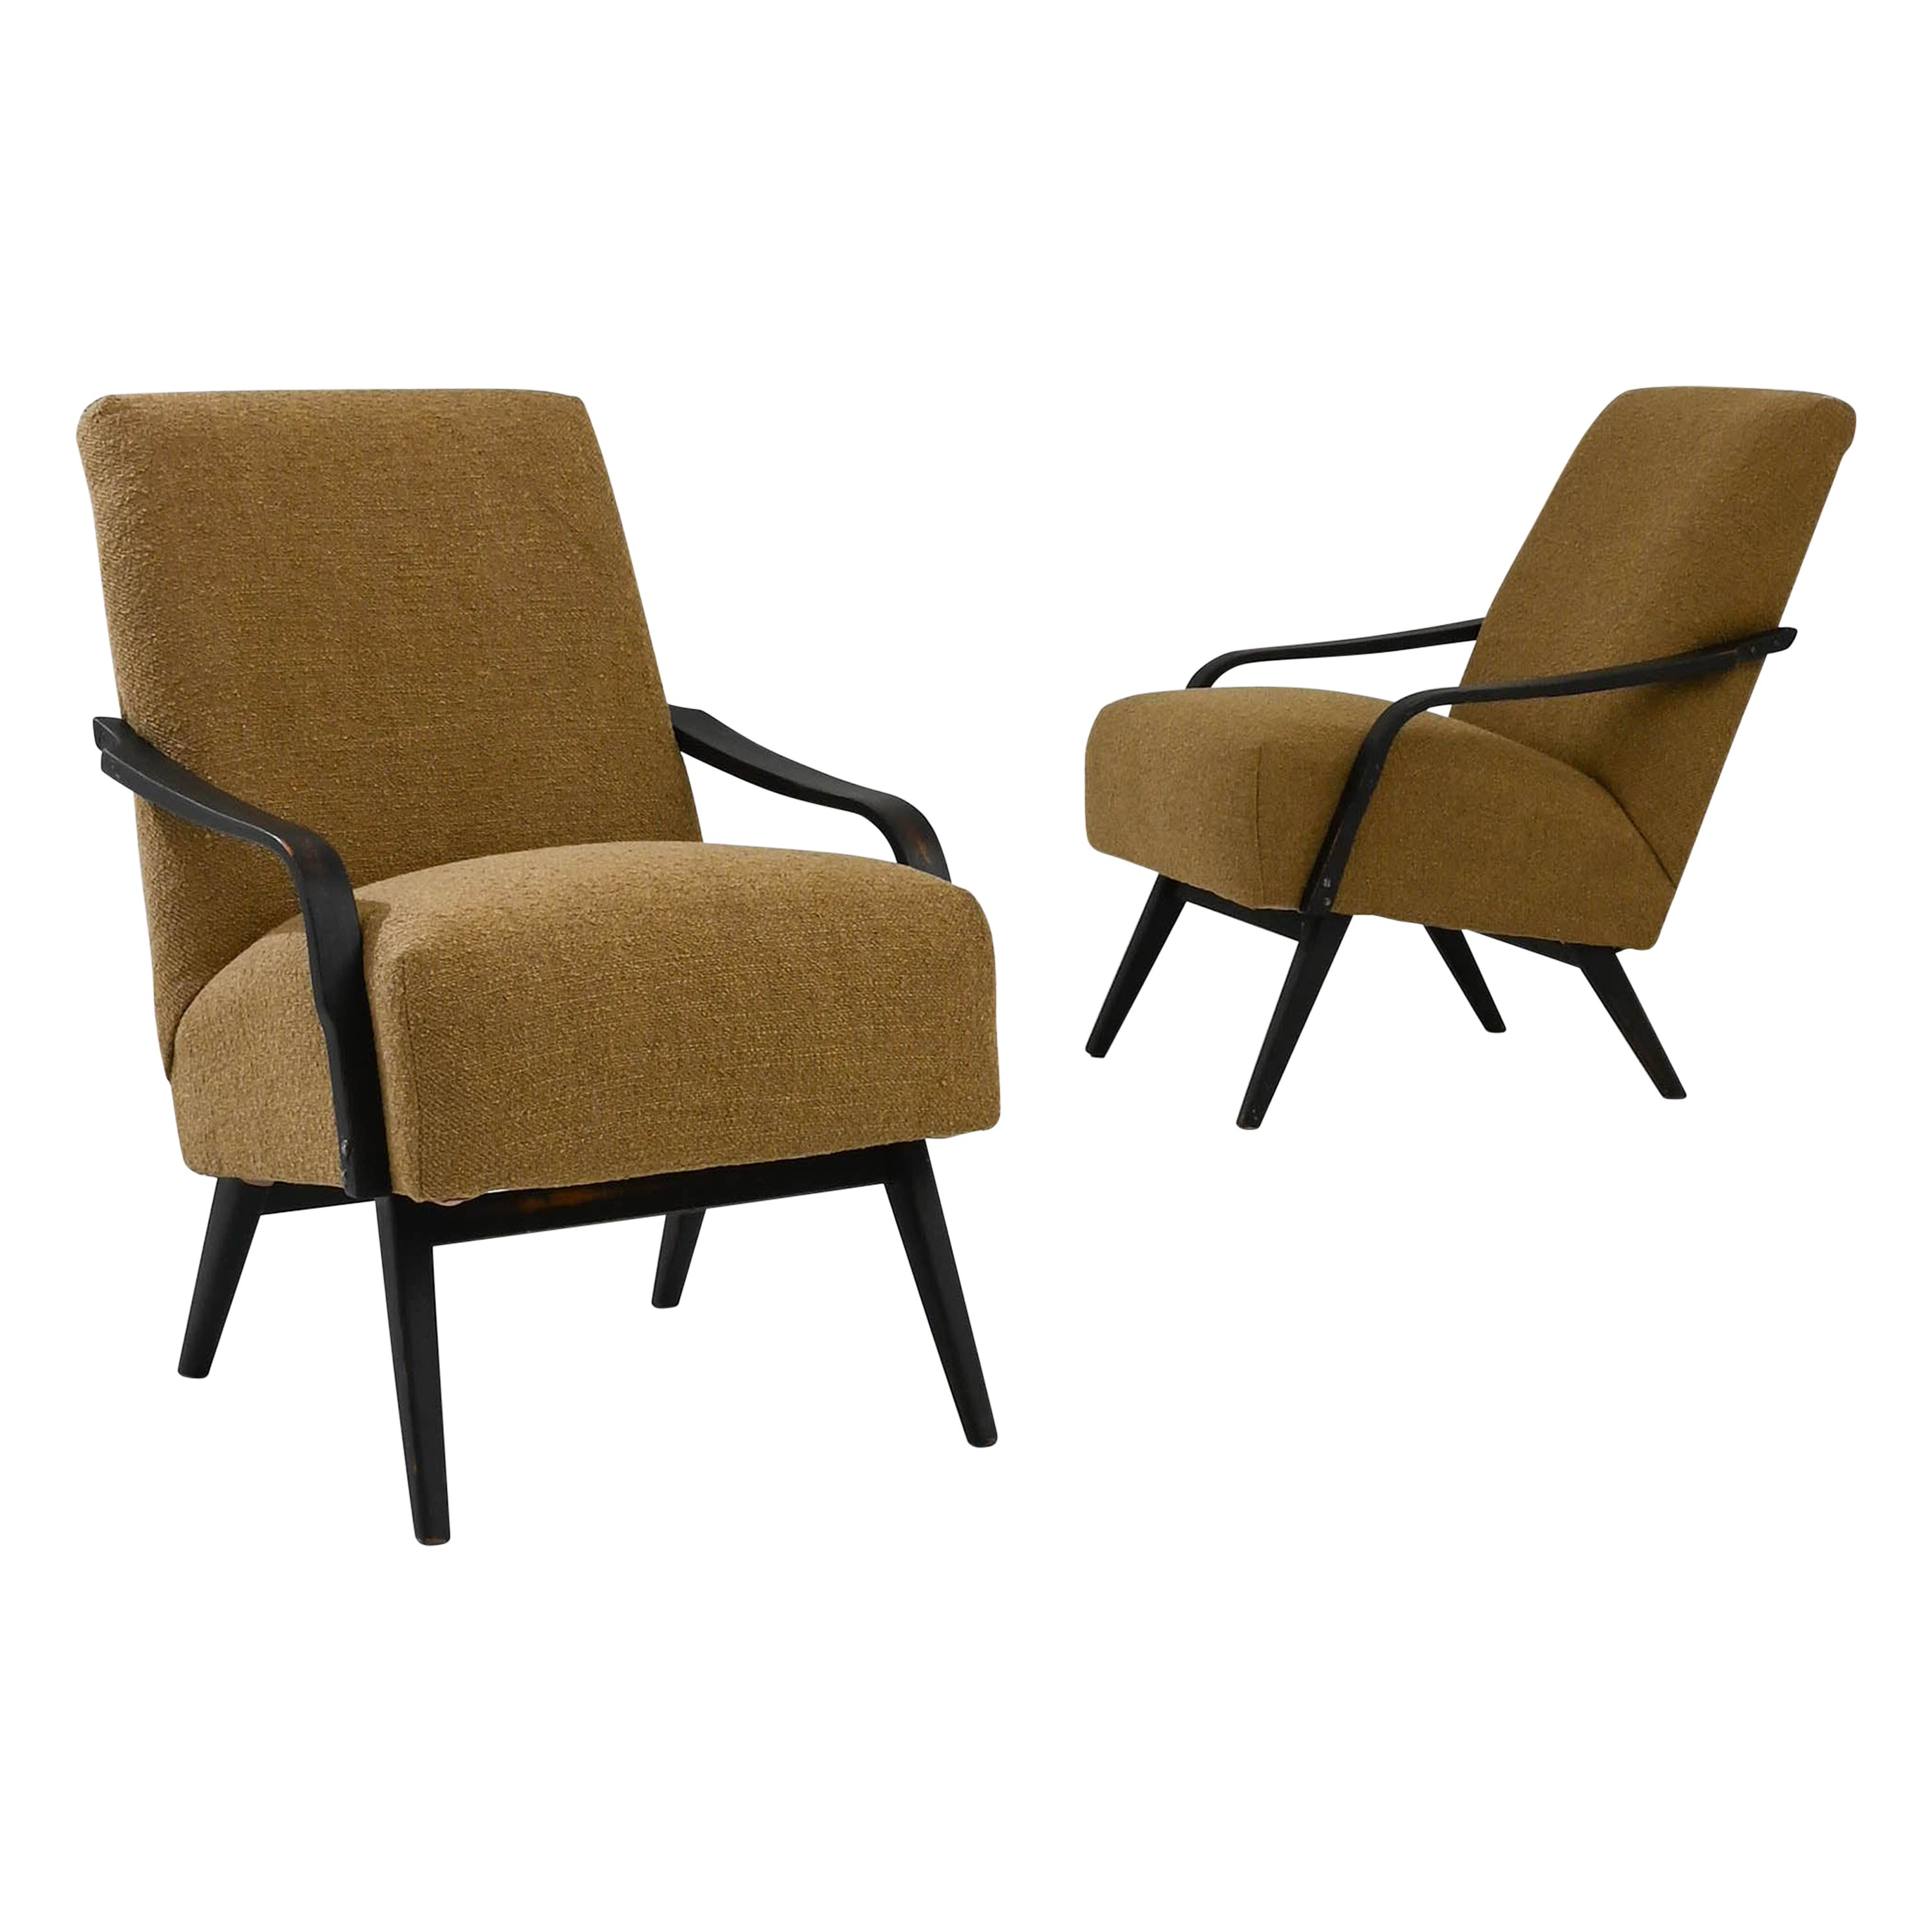 1960s Czech Upholstered Armchairs by TON, a Pair For Sale